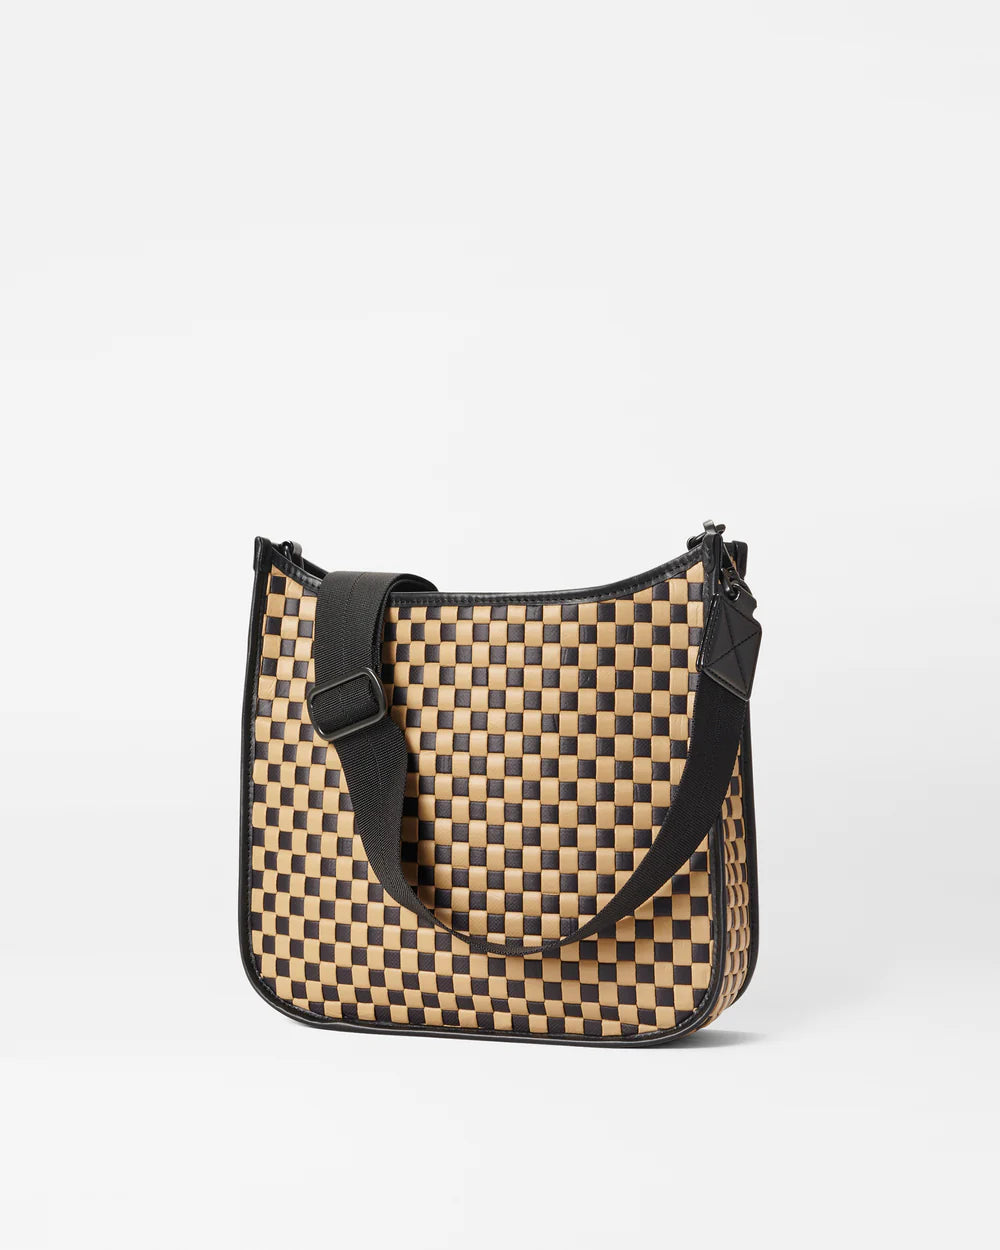 MZ WALLACE WOVEN BOX CROSSBODY IN CAMEL AND BLACK